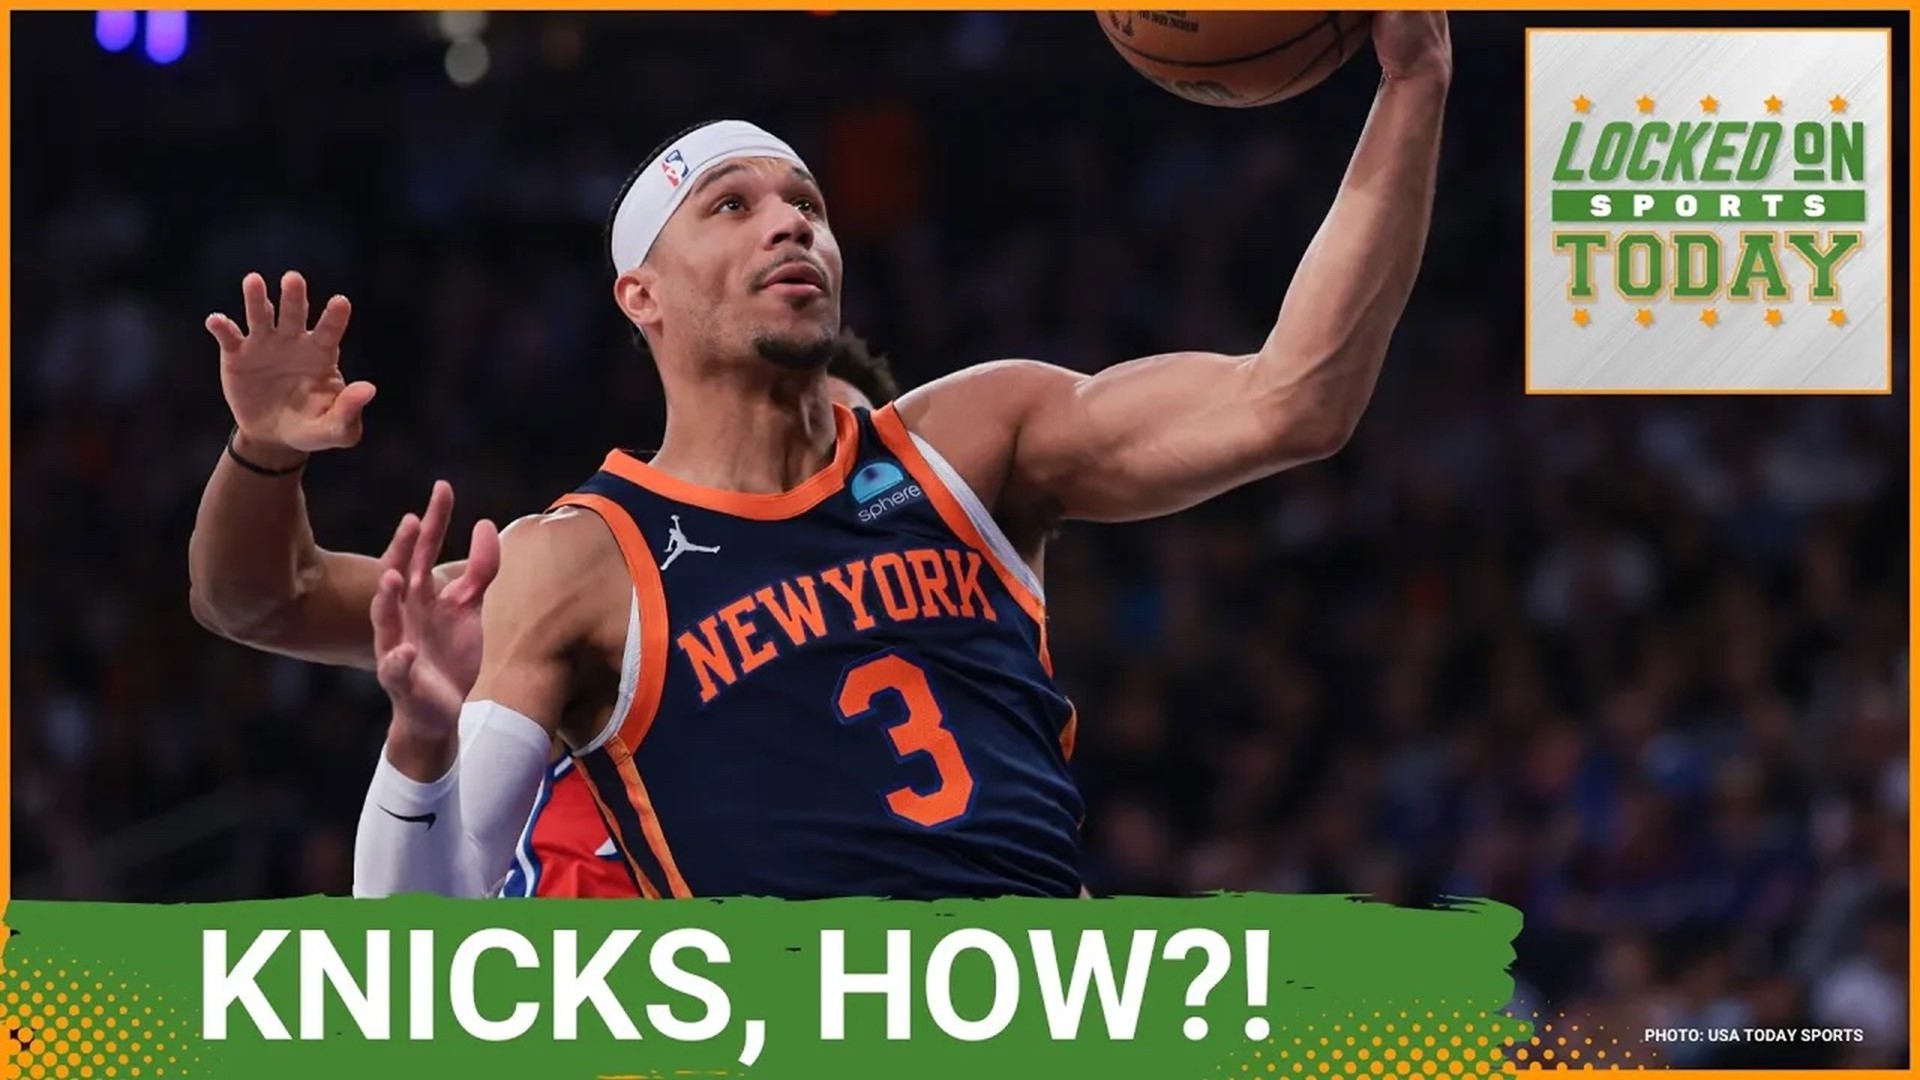 The New York Knicks shocked the Philadelphia 76ers, the Los Angeles Clippers dominated Luka Doncic and the Dallas Mavericks without Kawhi Leonard and more.